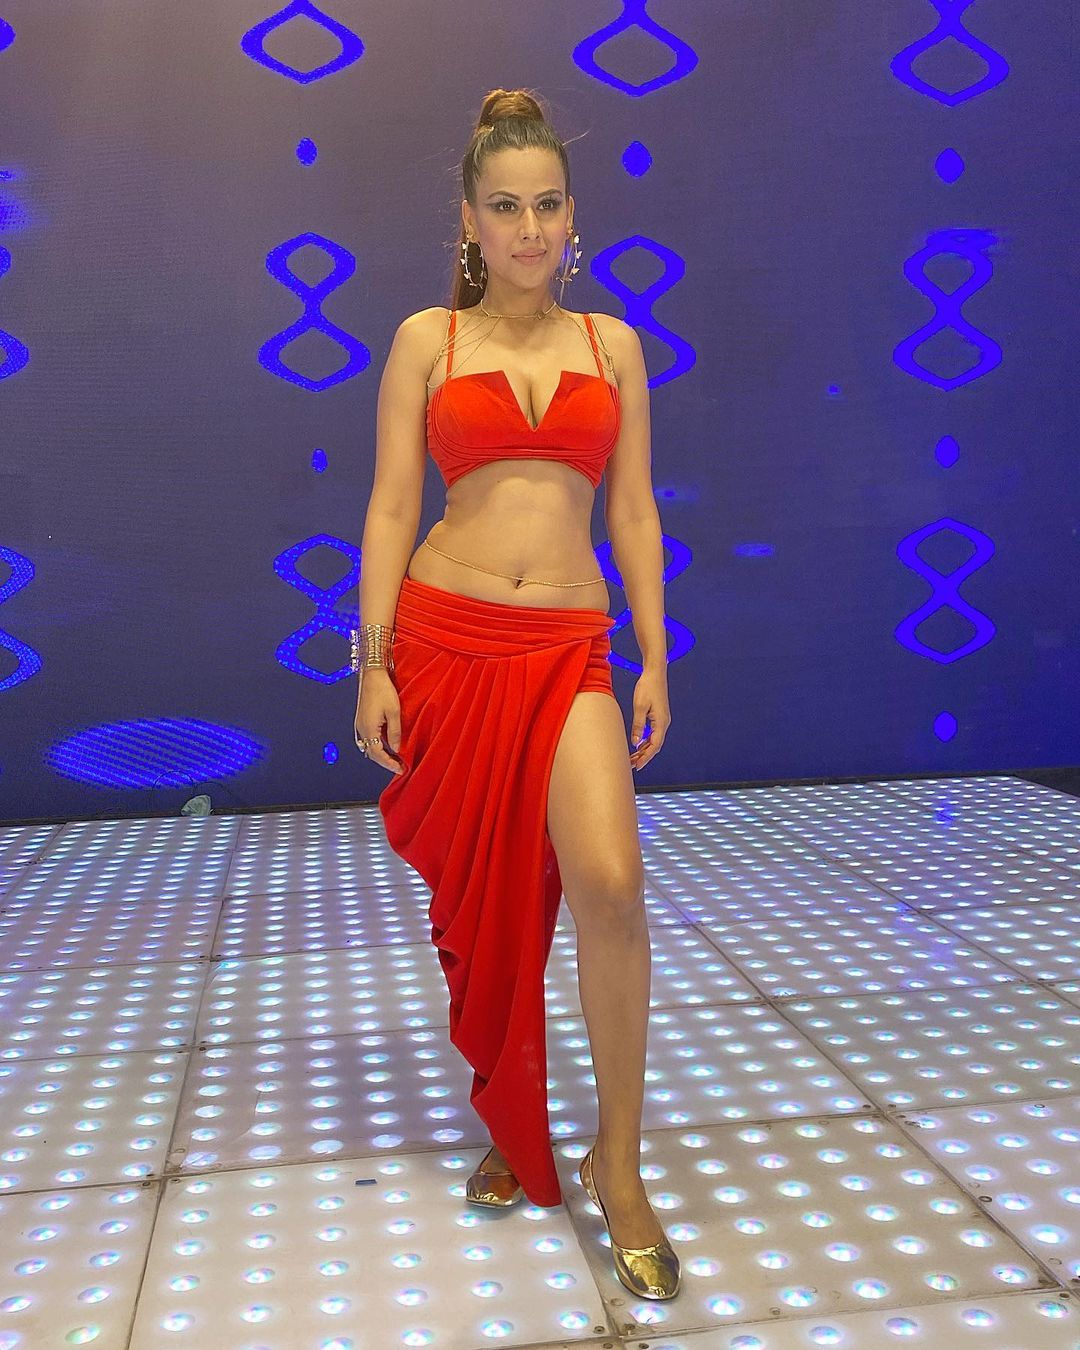 Nia Sharma looks smoking hot in a sexy red outfit